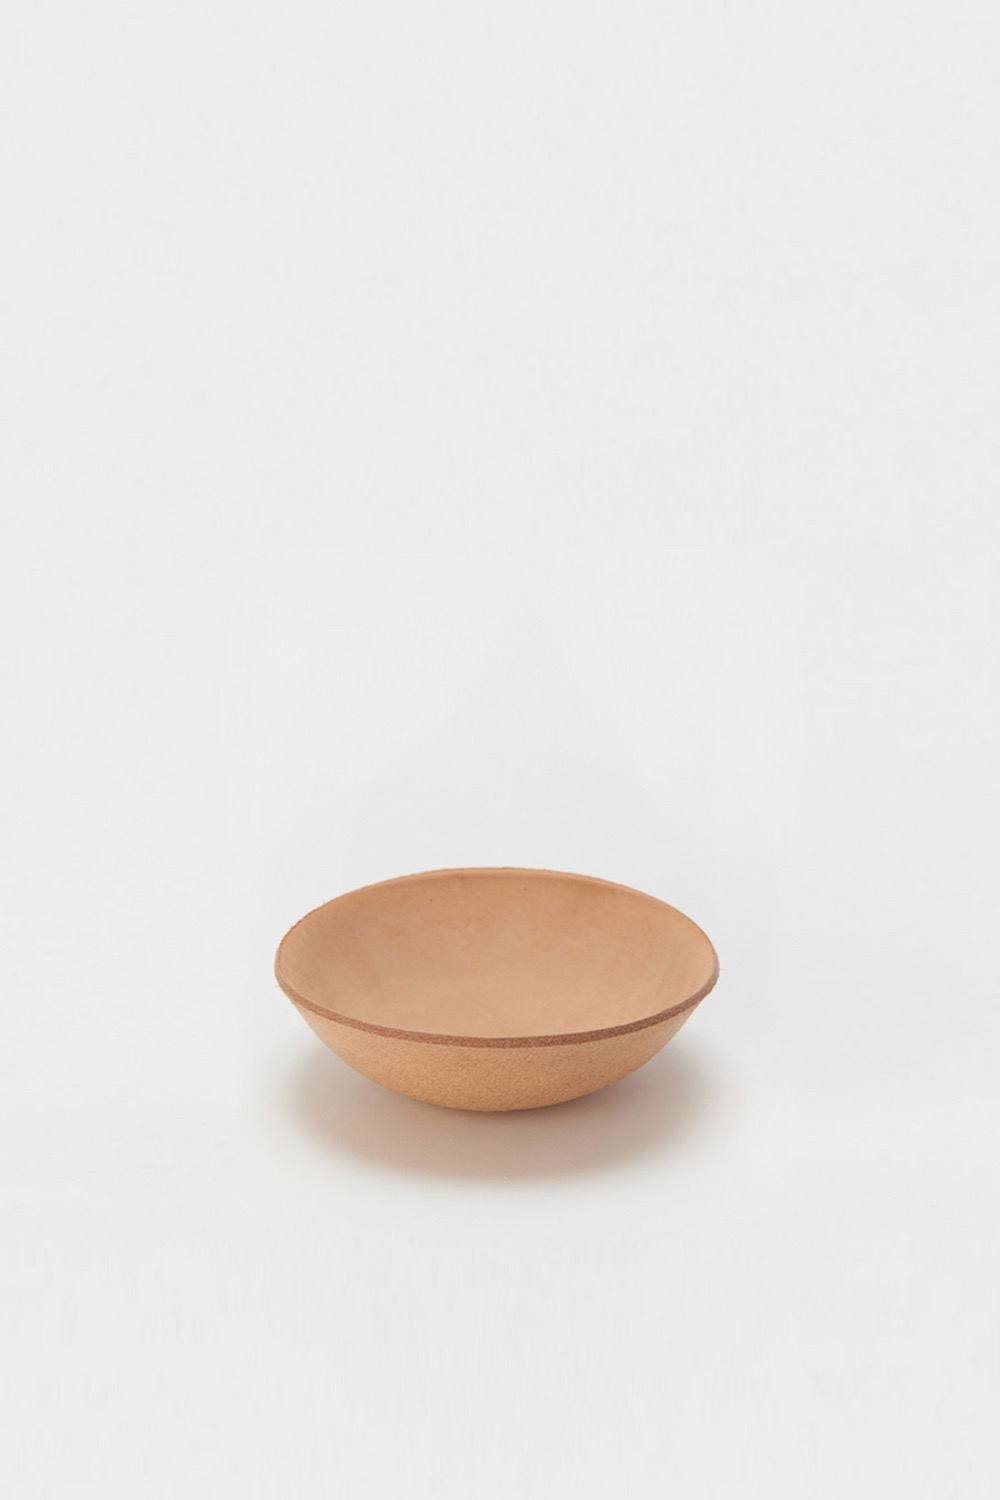 [RESTOCK] BOWL COW LEATHER NATURAL